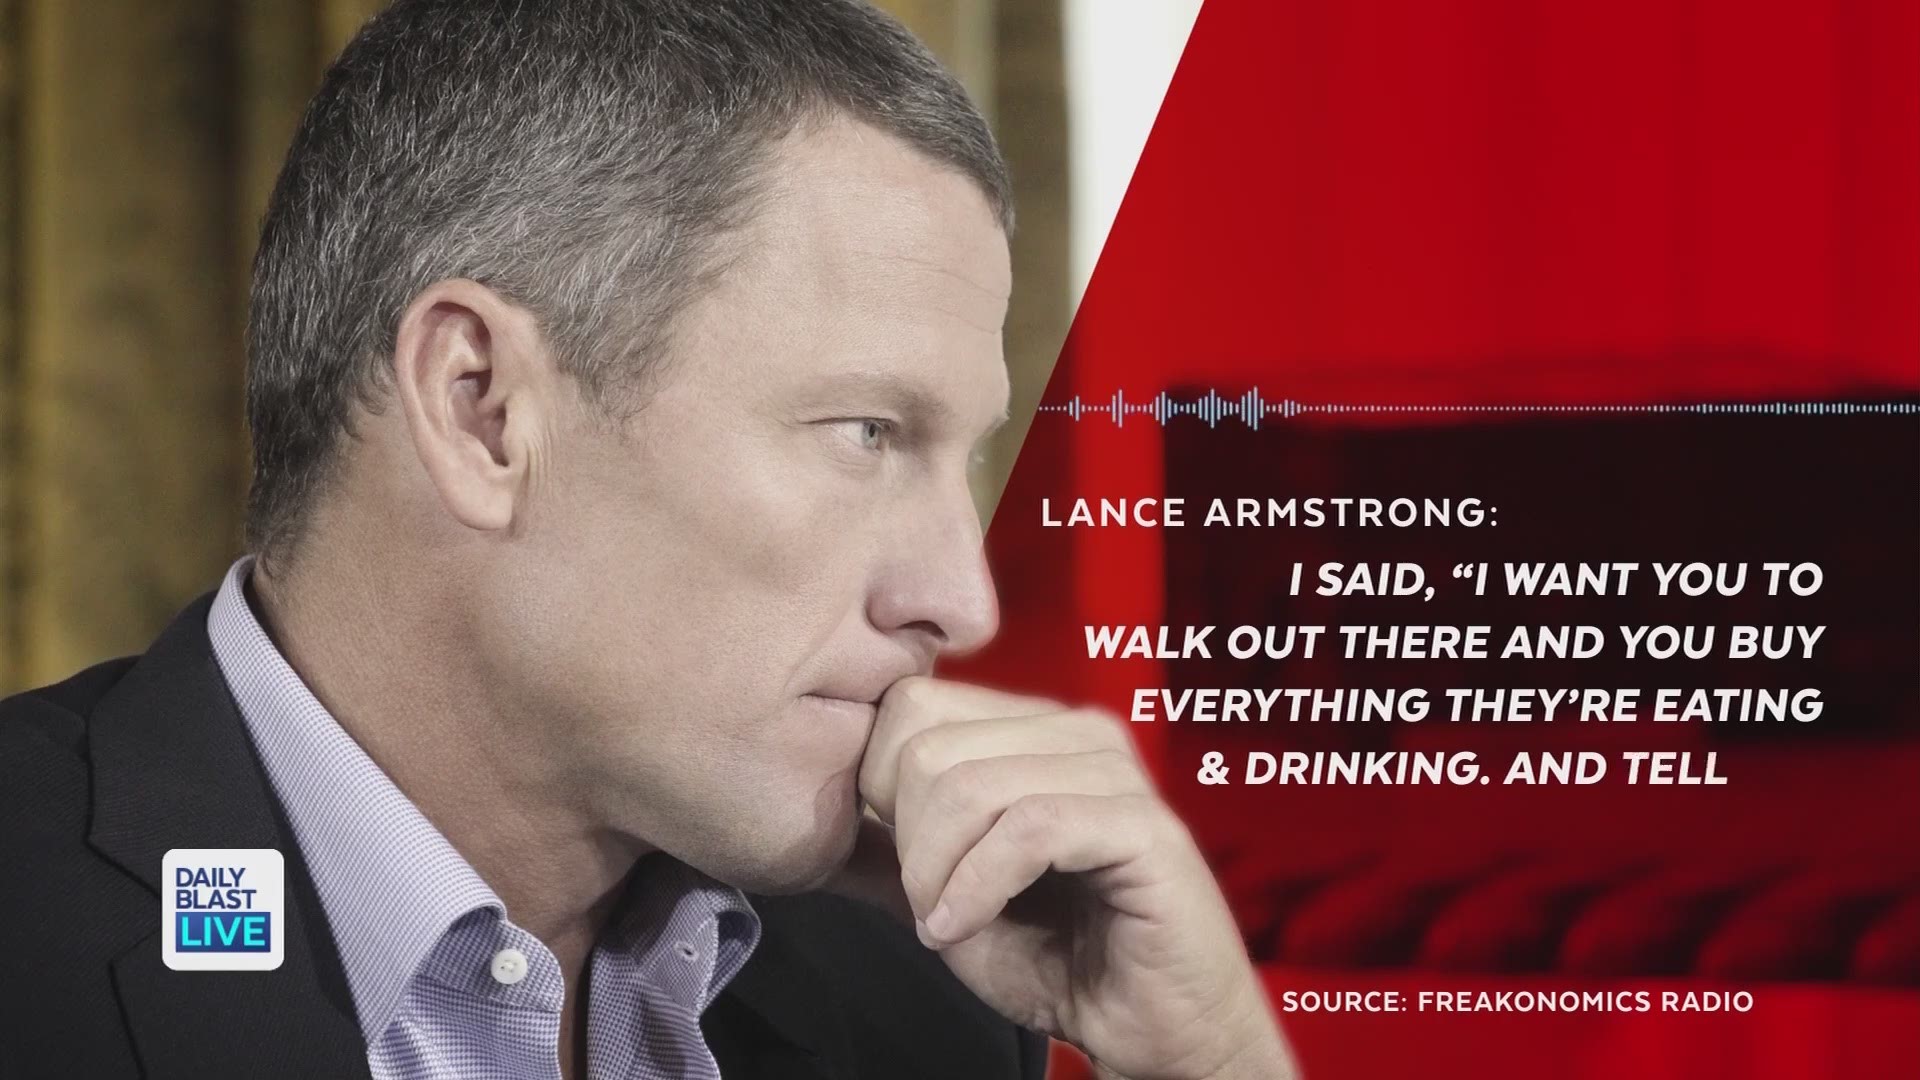 During an interview, Lance Armstrong said he understands why people are still upset about his doping scandal.